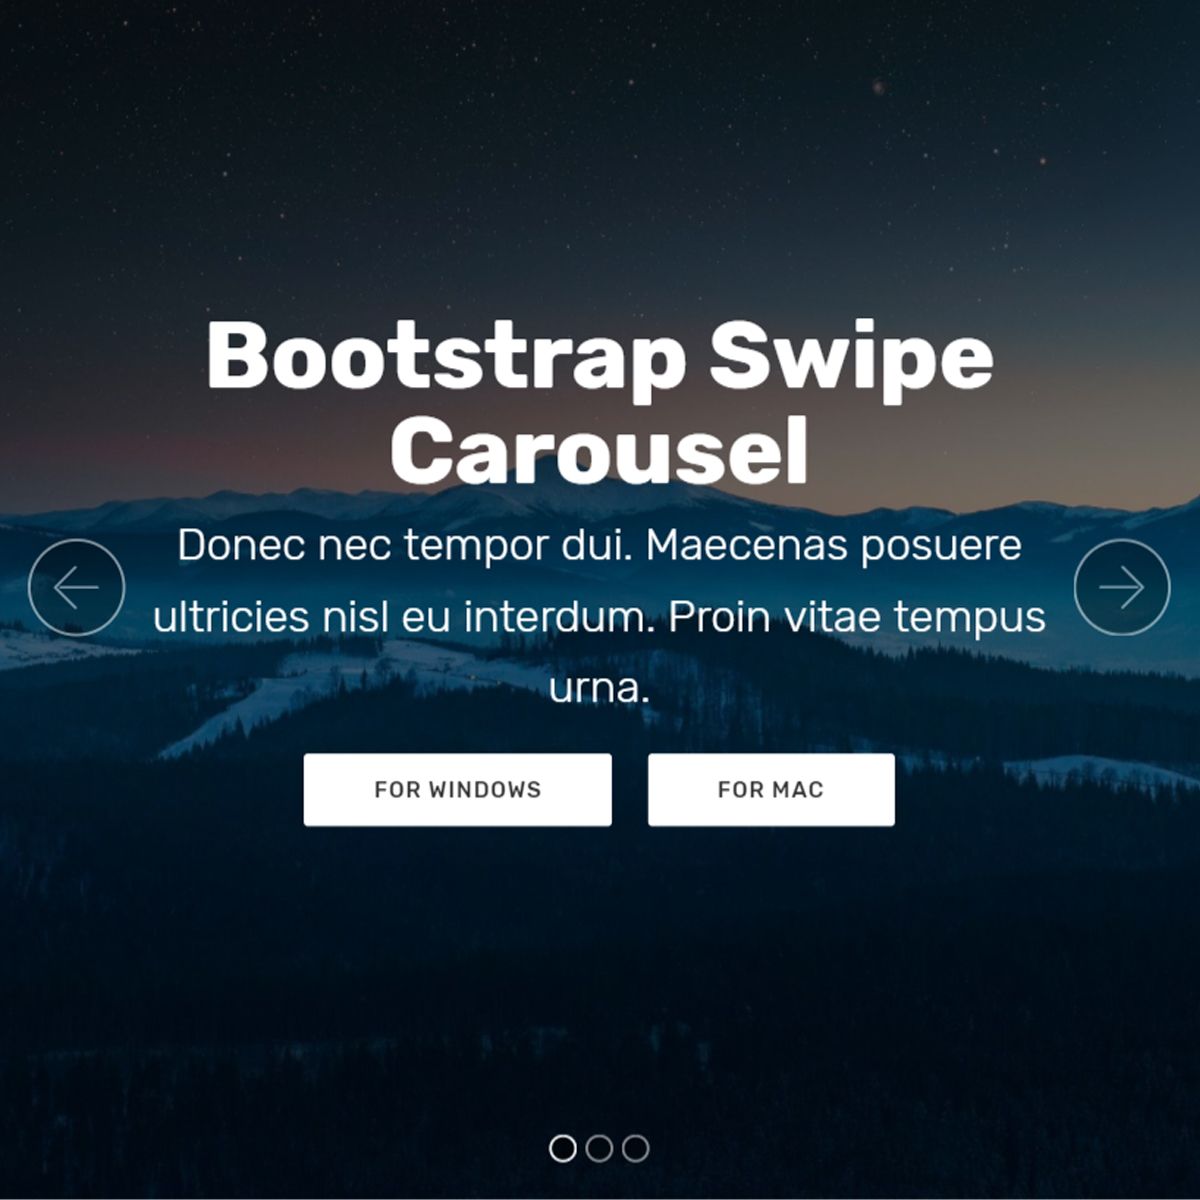 HTML Bootstrap Image Carousel